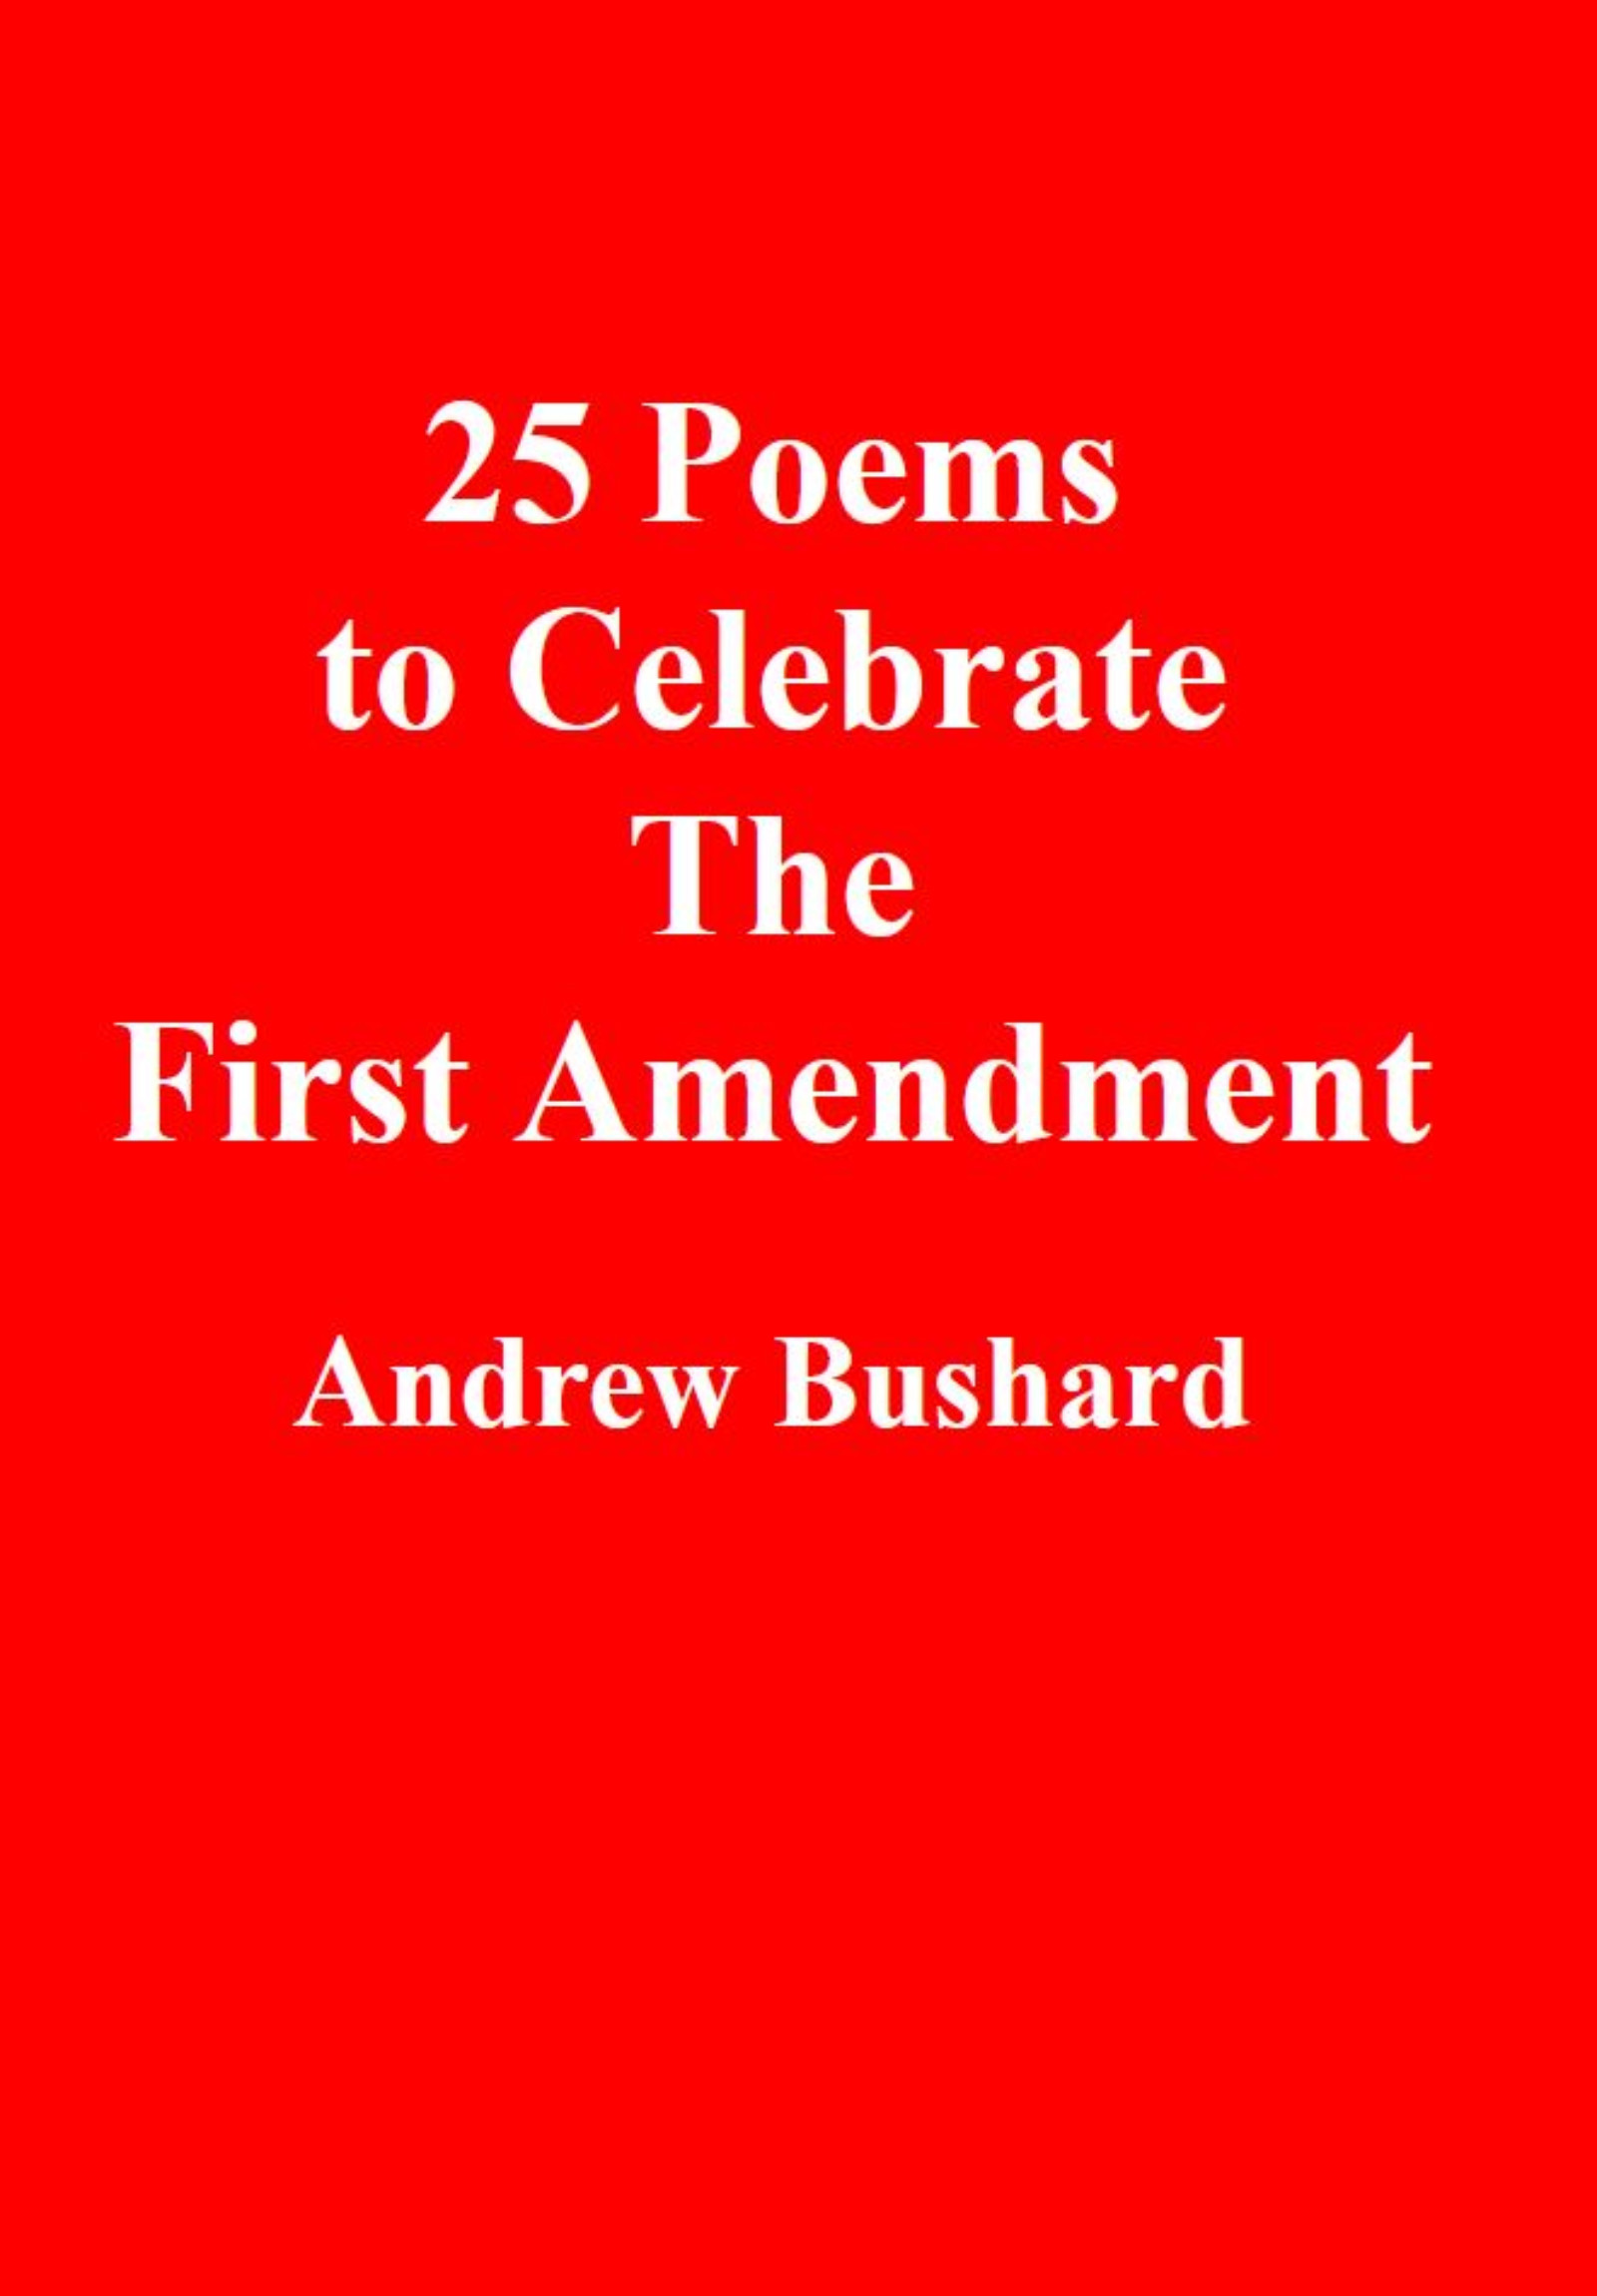 25 Poems to Celebrate the First Amendment's featured image